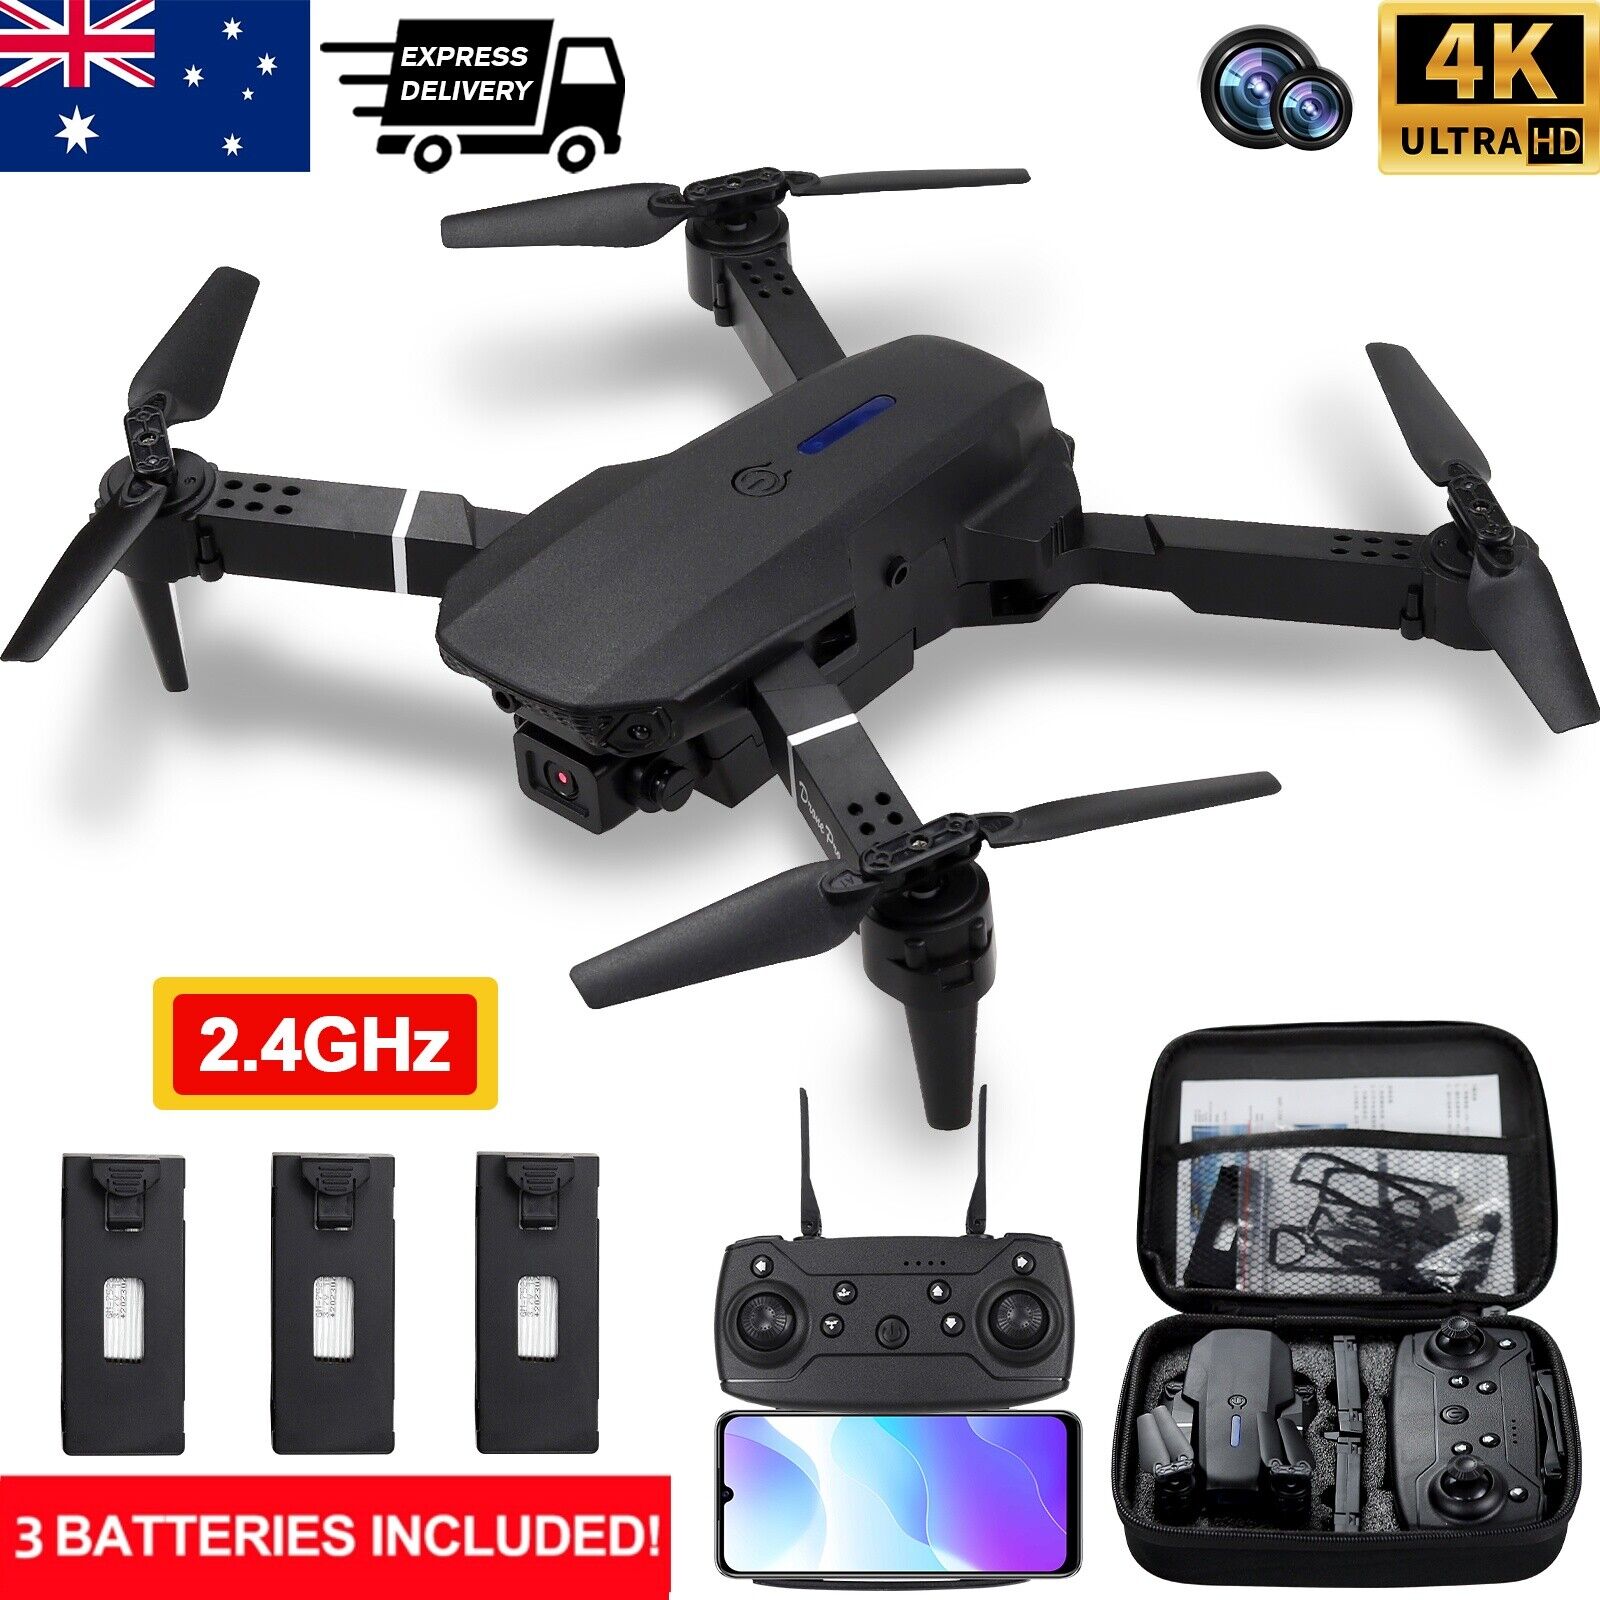 4K Drone with HD Camera Drones WiFi FPV Foldable RC Quadcopter 3 Batteries AU